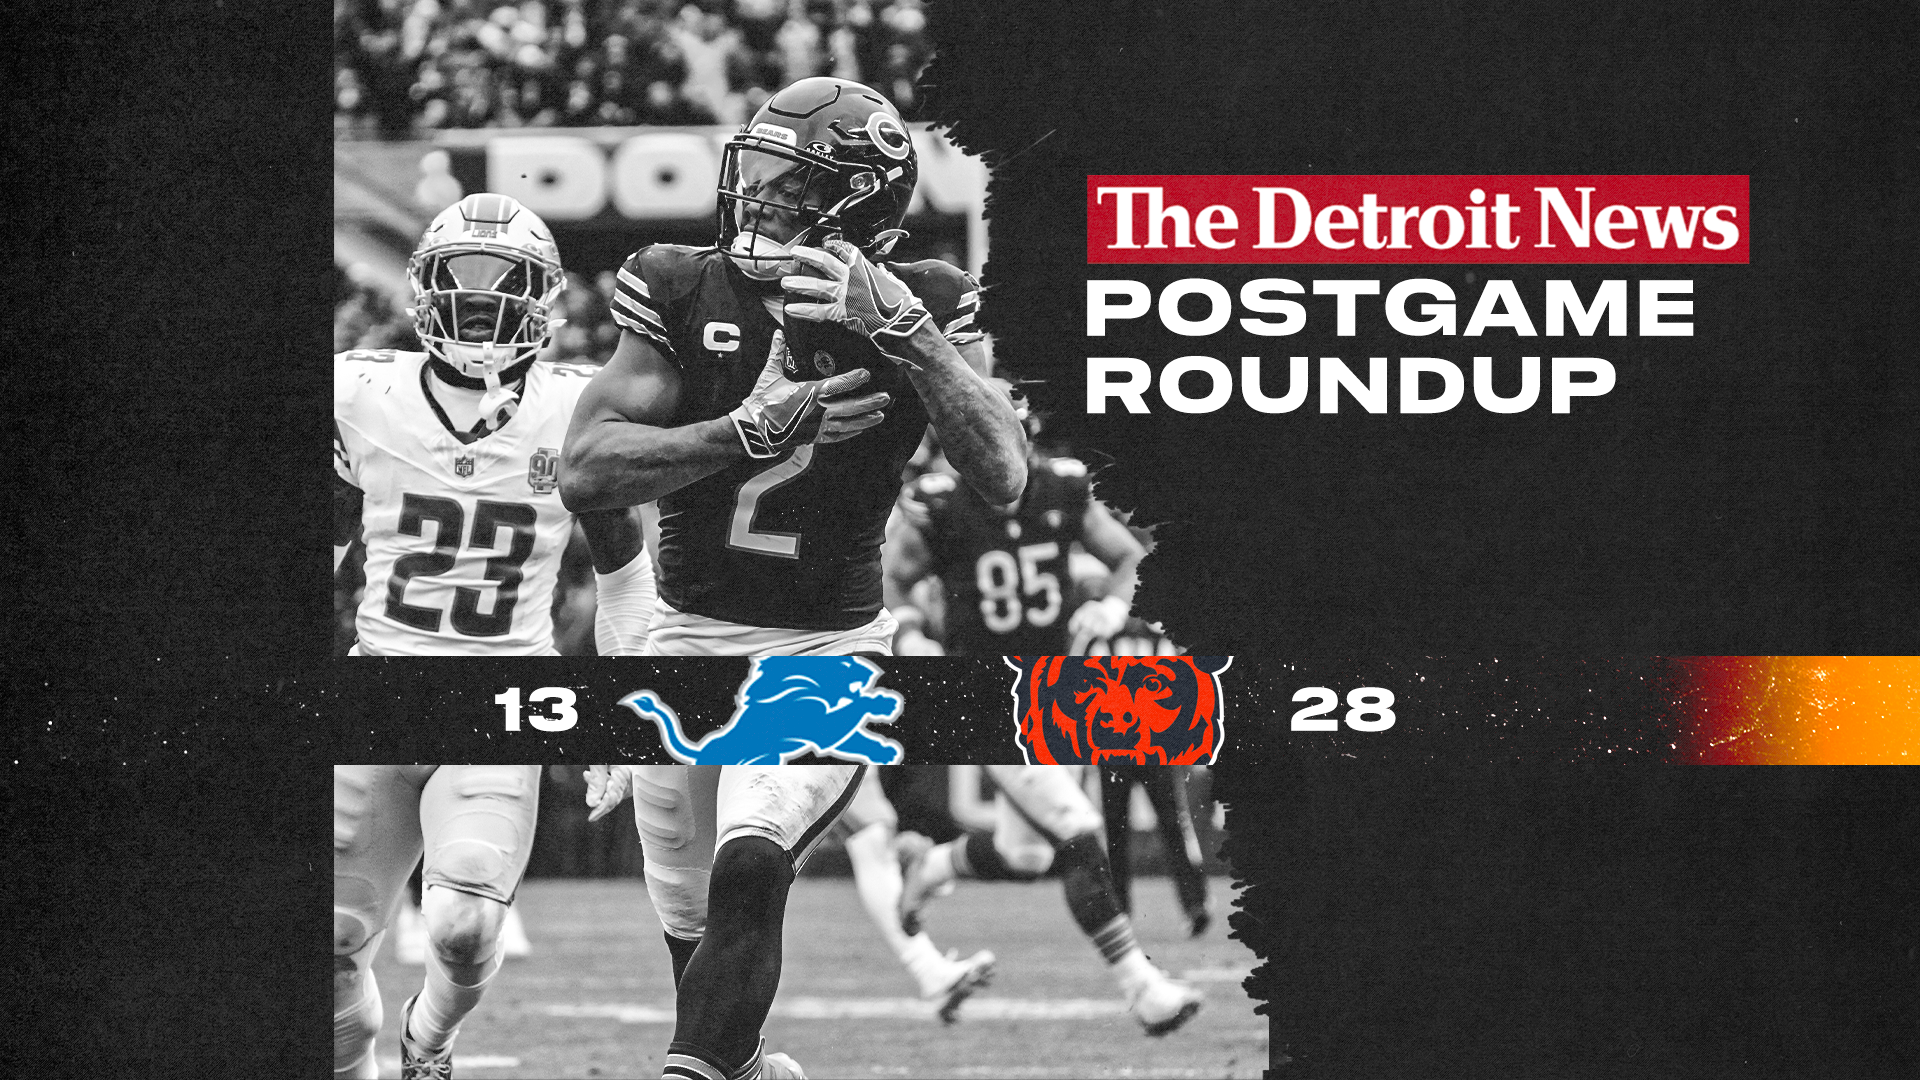 Here's a roundup of all of The Detroit News' coverage from the Detroit Lions' 28-13 loss to the Chicago Bears at Soldier Field in Chicago.